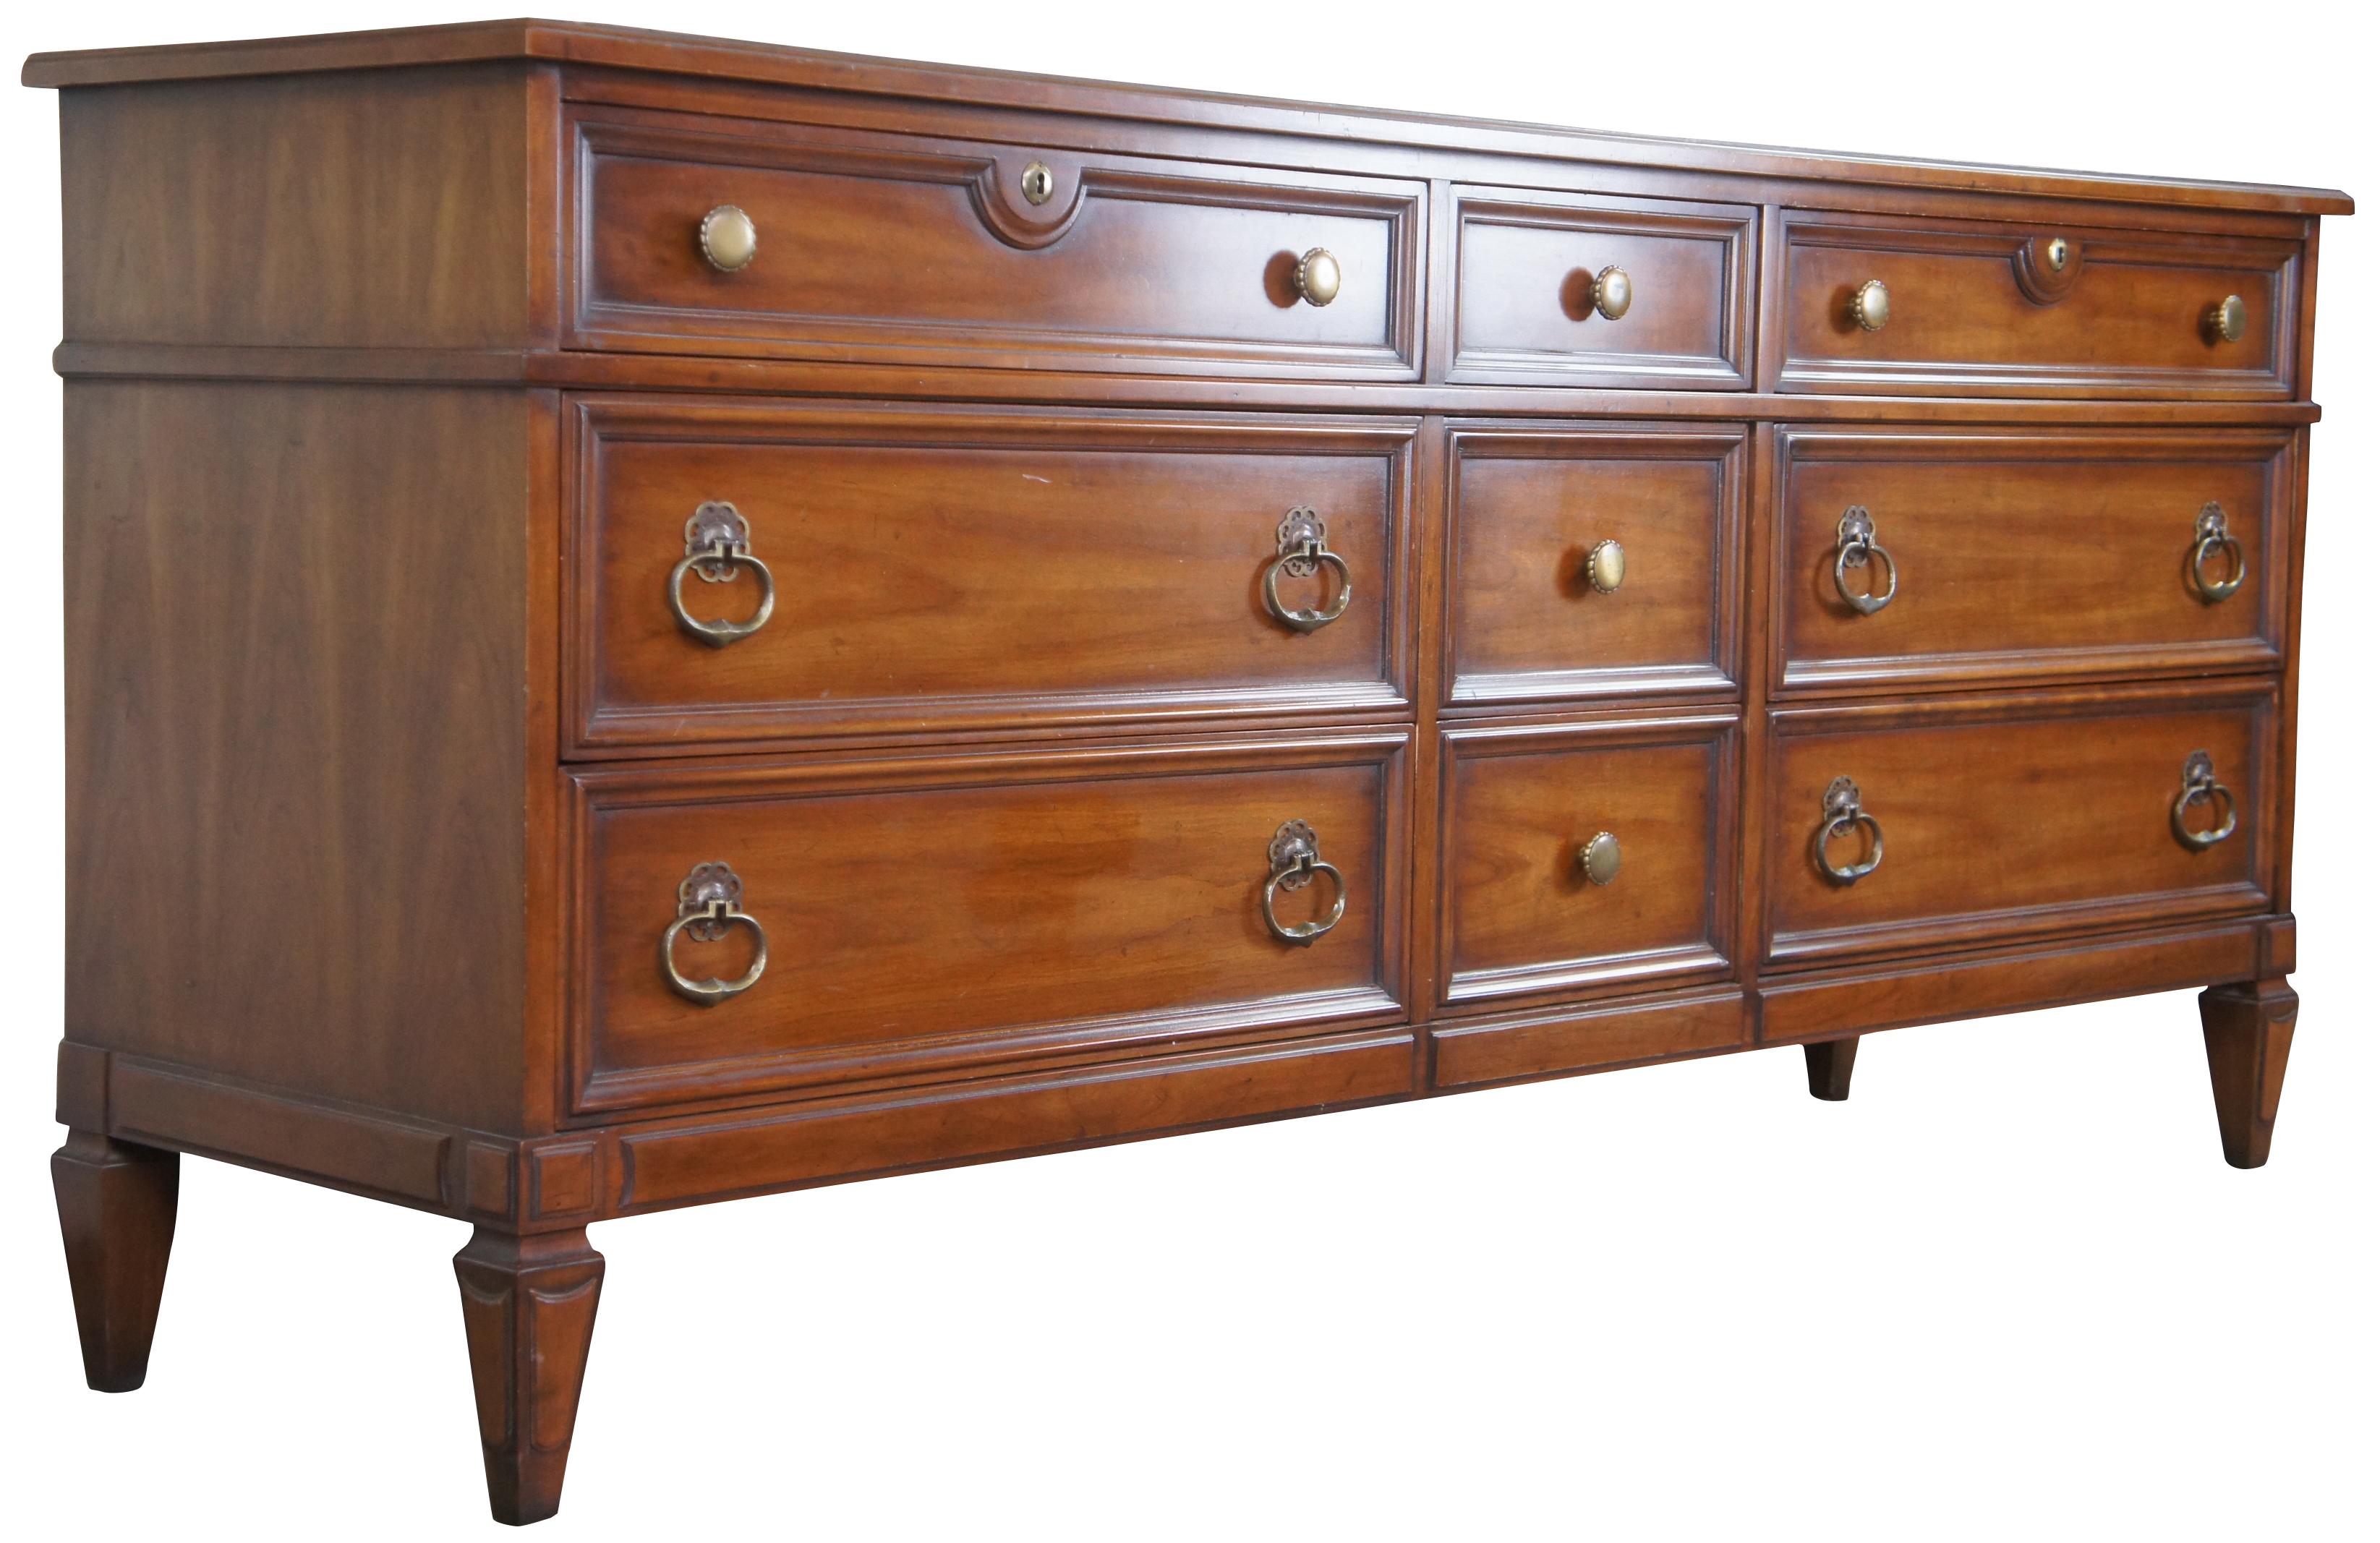 Circa 1960s Drexel Heritage Modavanti Mediterranean Collection Dresser, 14-153-30. Drawing inspiration from early Renaissance, Italian, classical and other European designs. A rectangular form made from fruitwood with nine dovetailed drawers